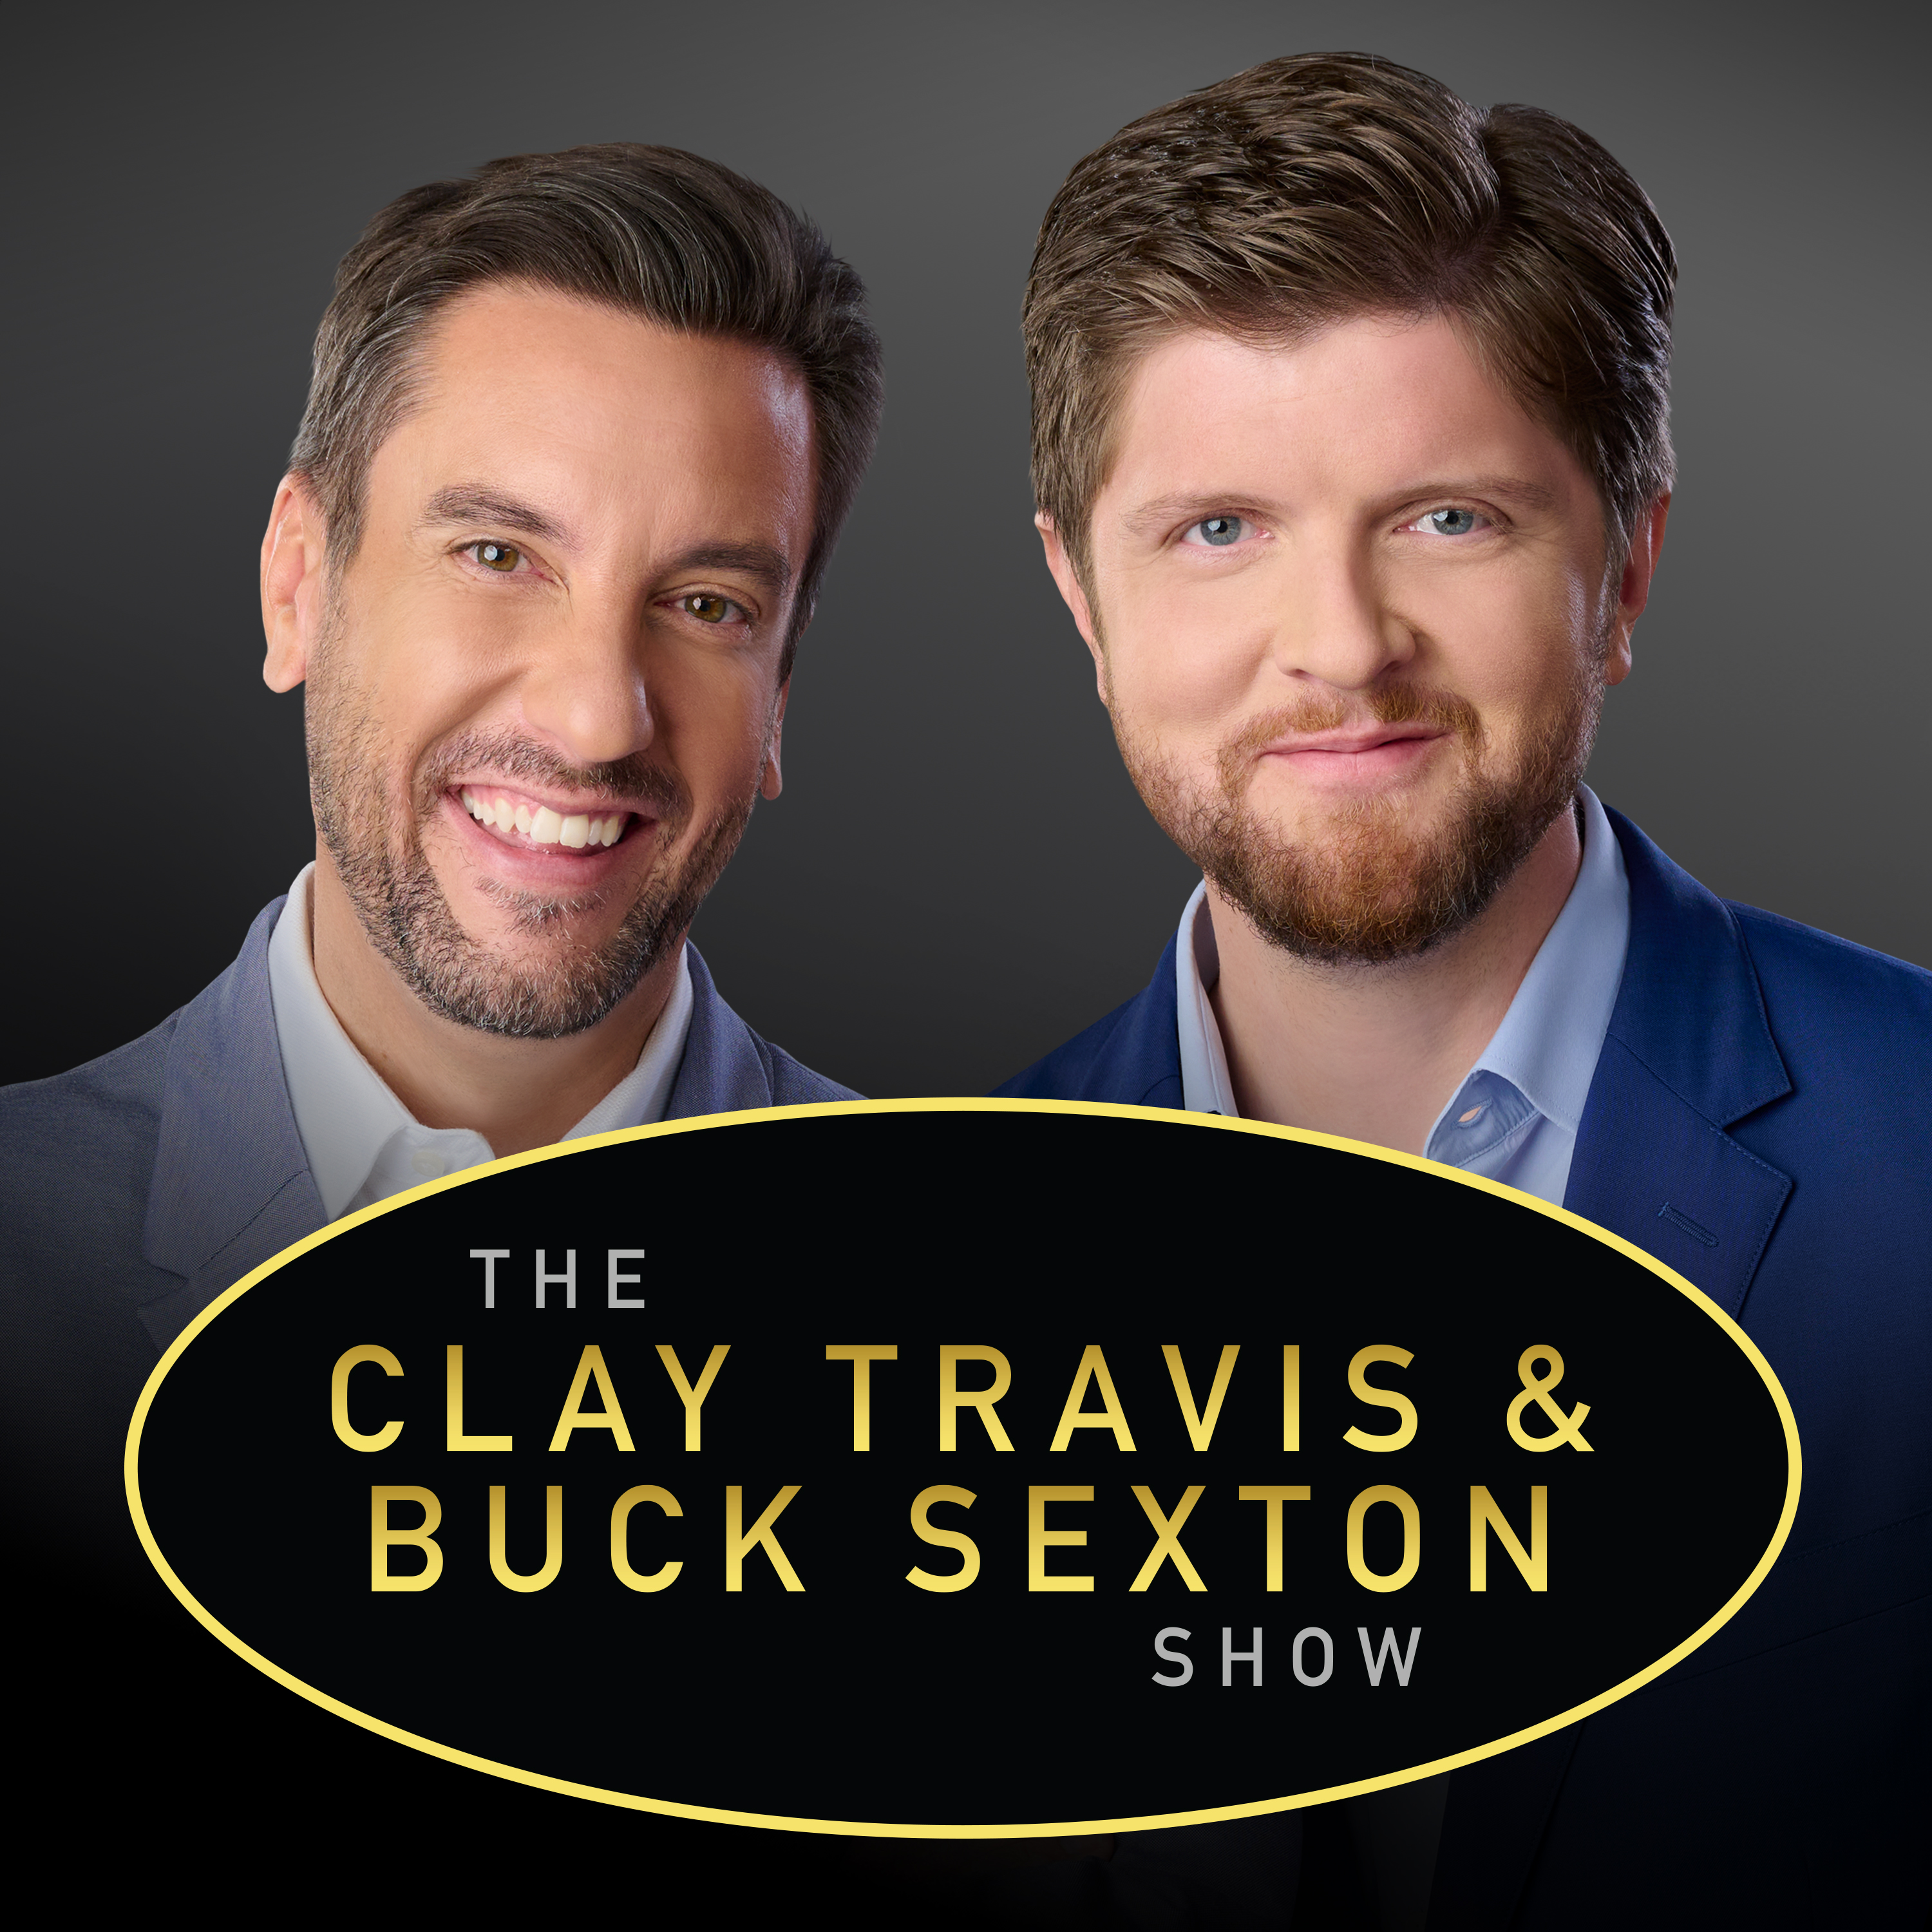 Clay Travis and Buck Sexton Show H2 – Sep 19 2022